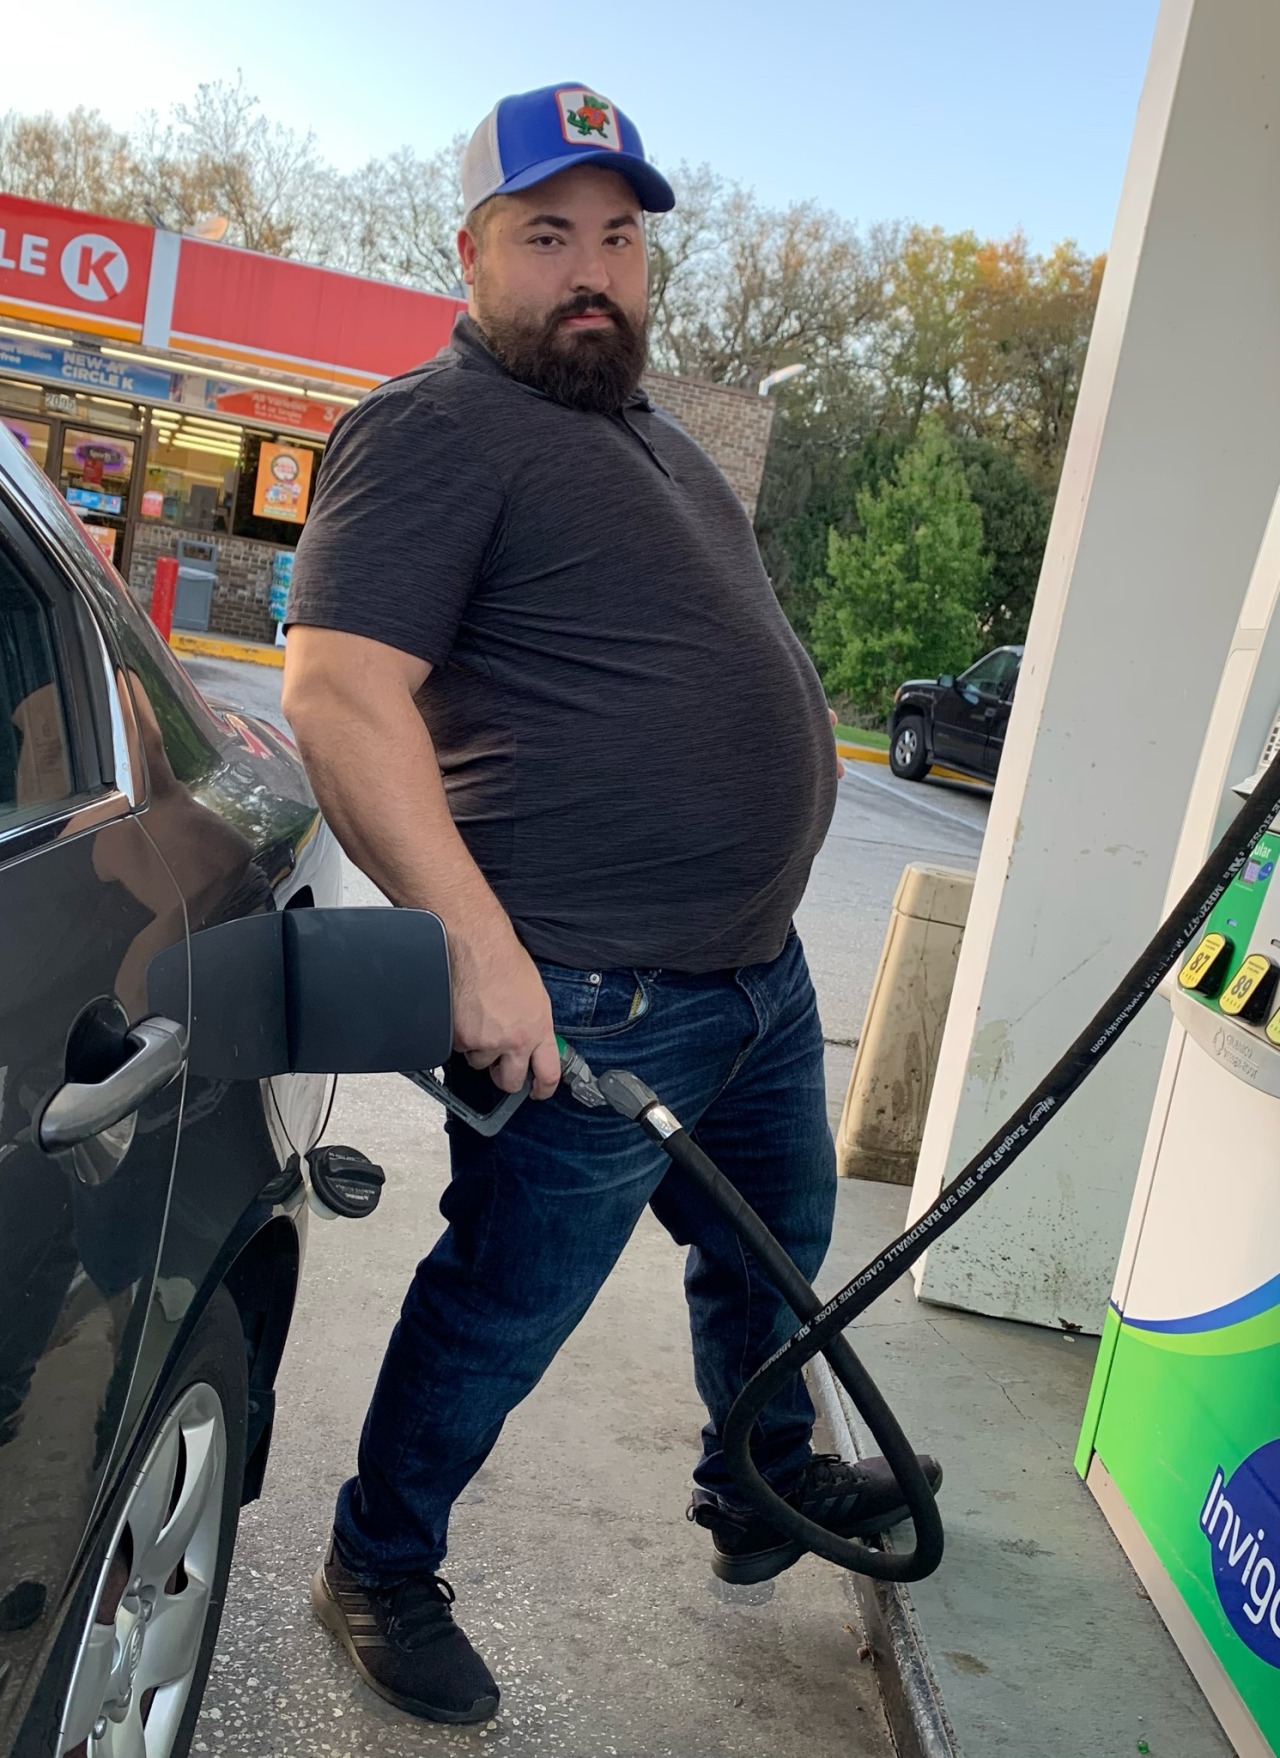 alphabelly:I’m hungry af and this slow ass gas pump is holding me up from getting